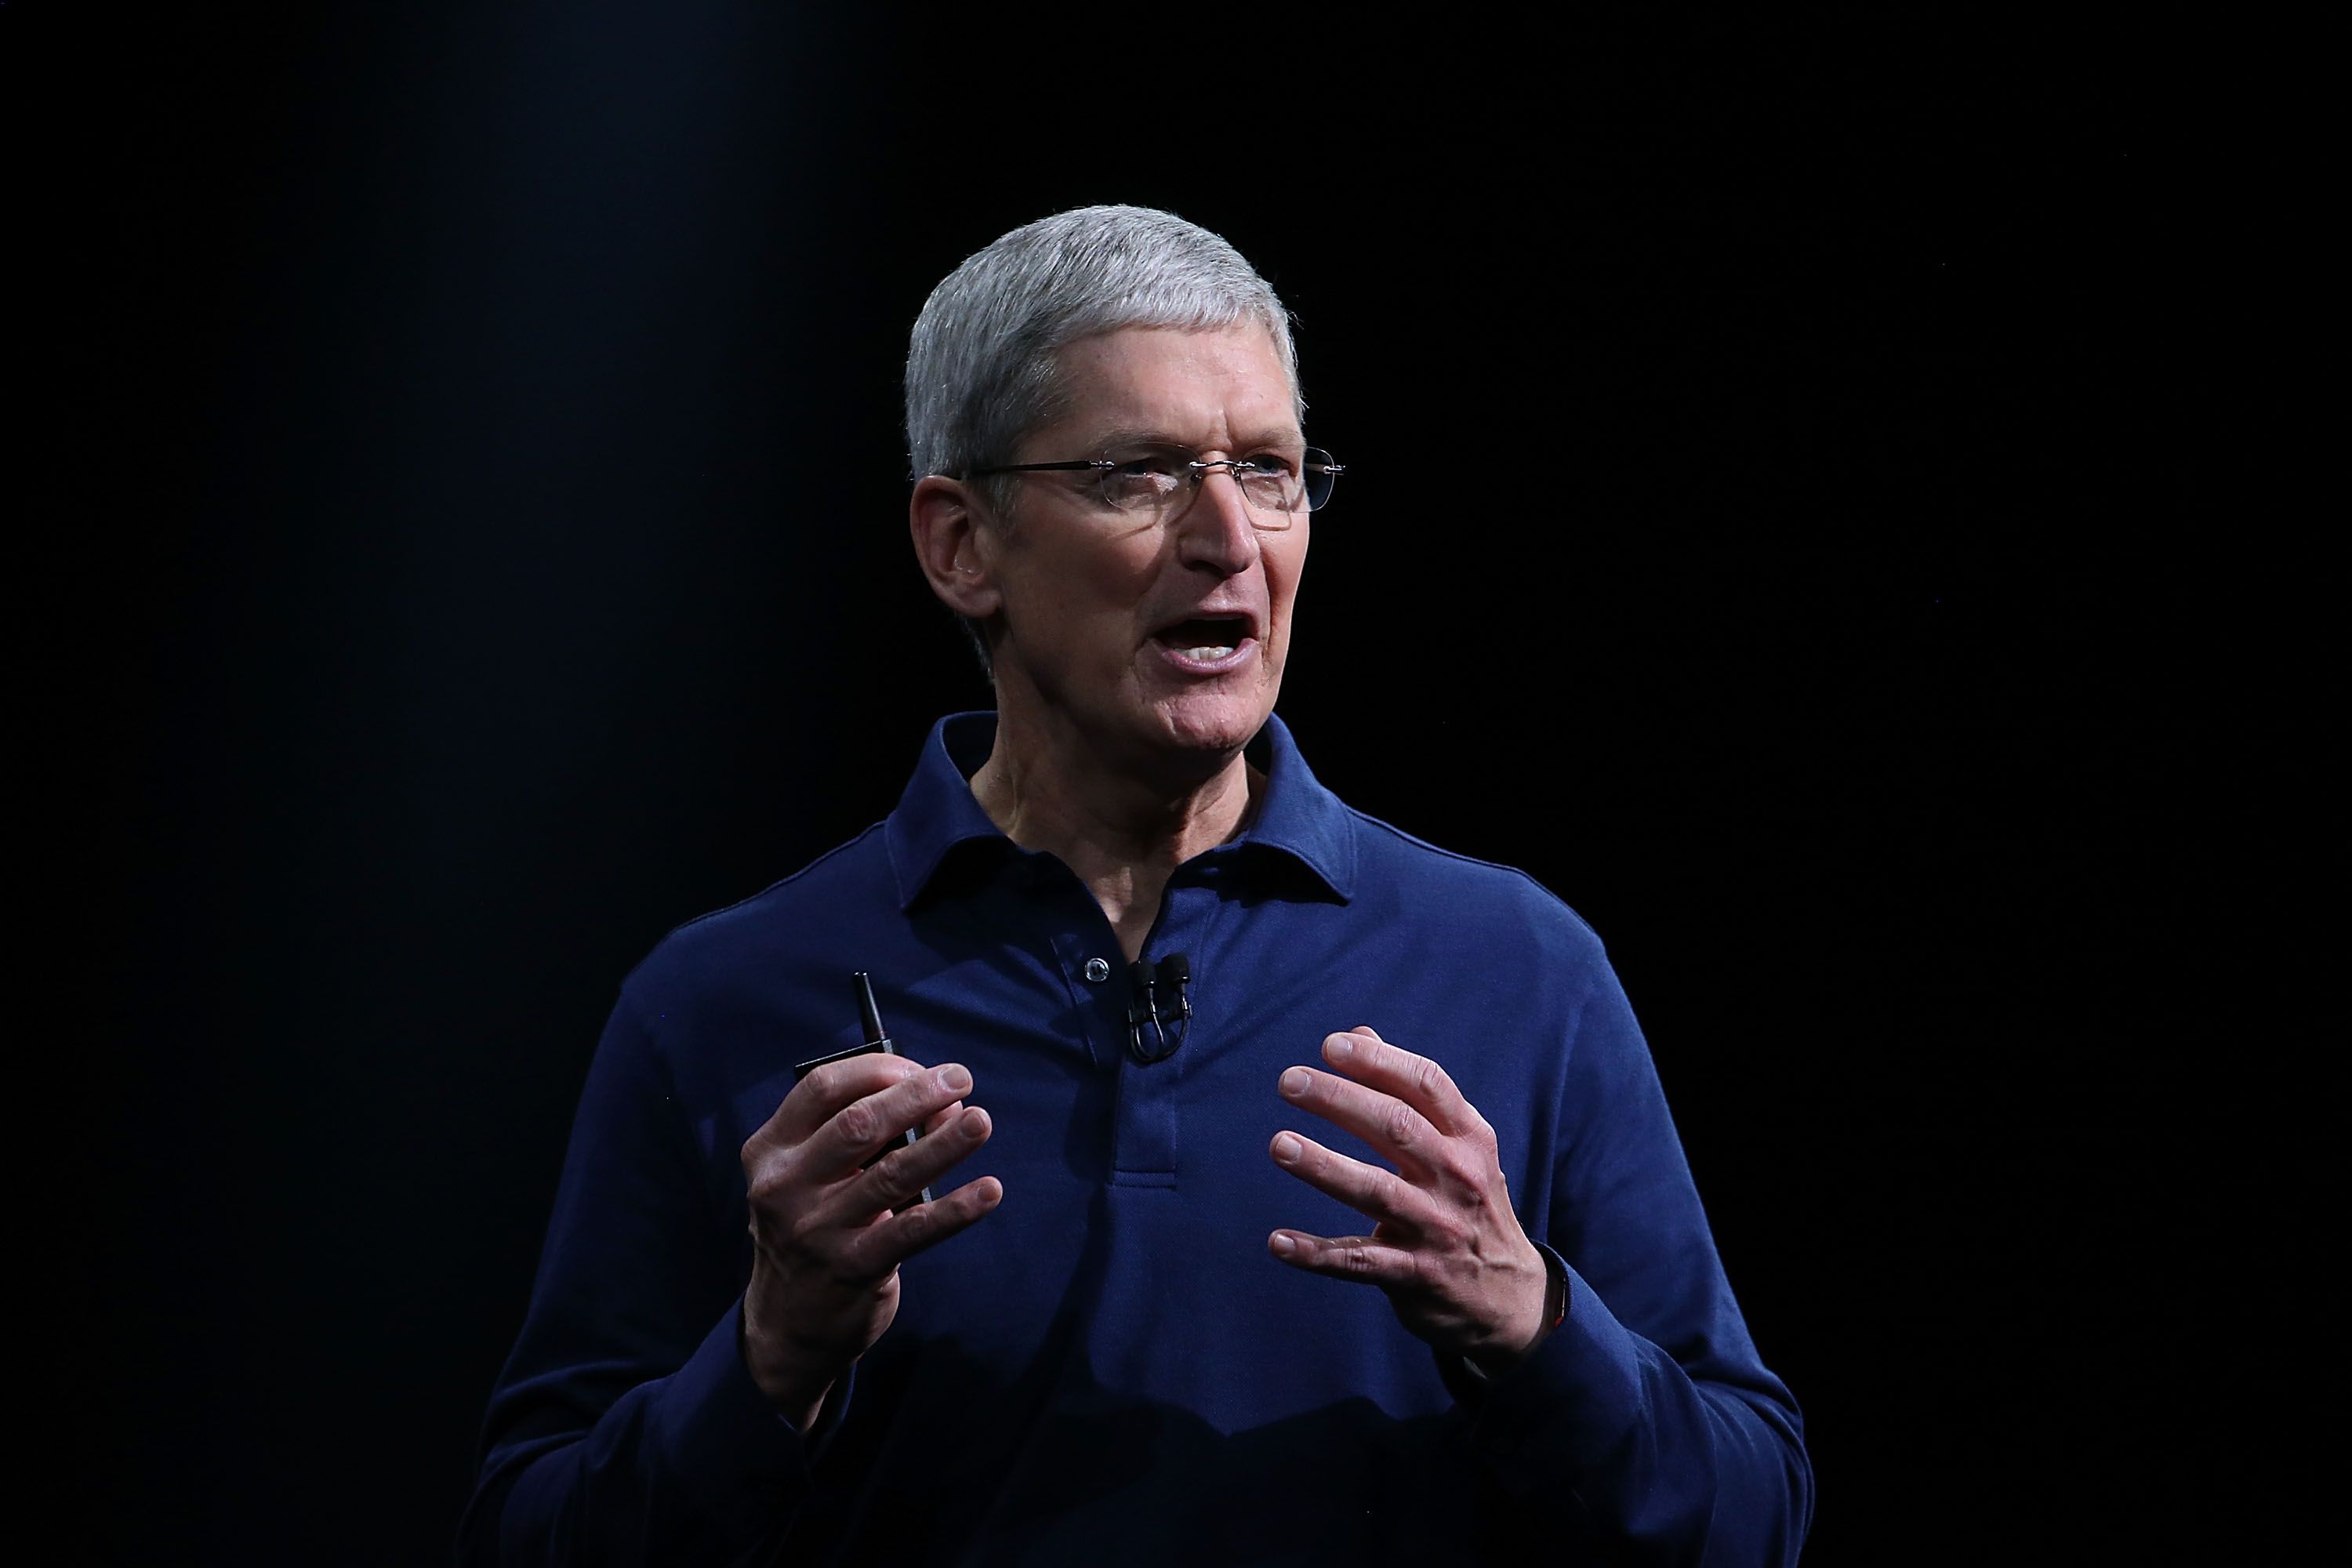 Apple's Tim Cook makes blistering attack on the 'data industrial complex' | TechCrunch